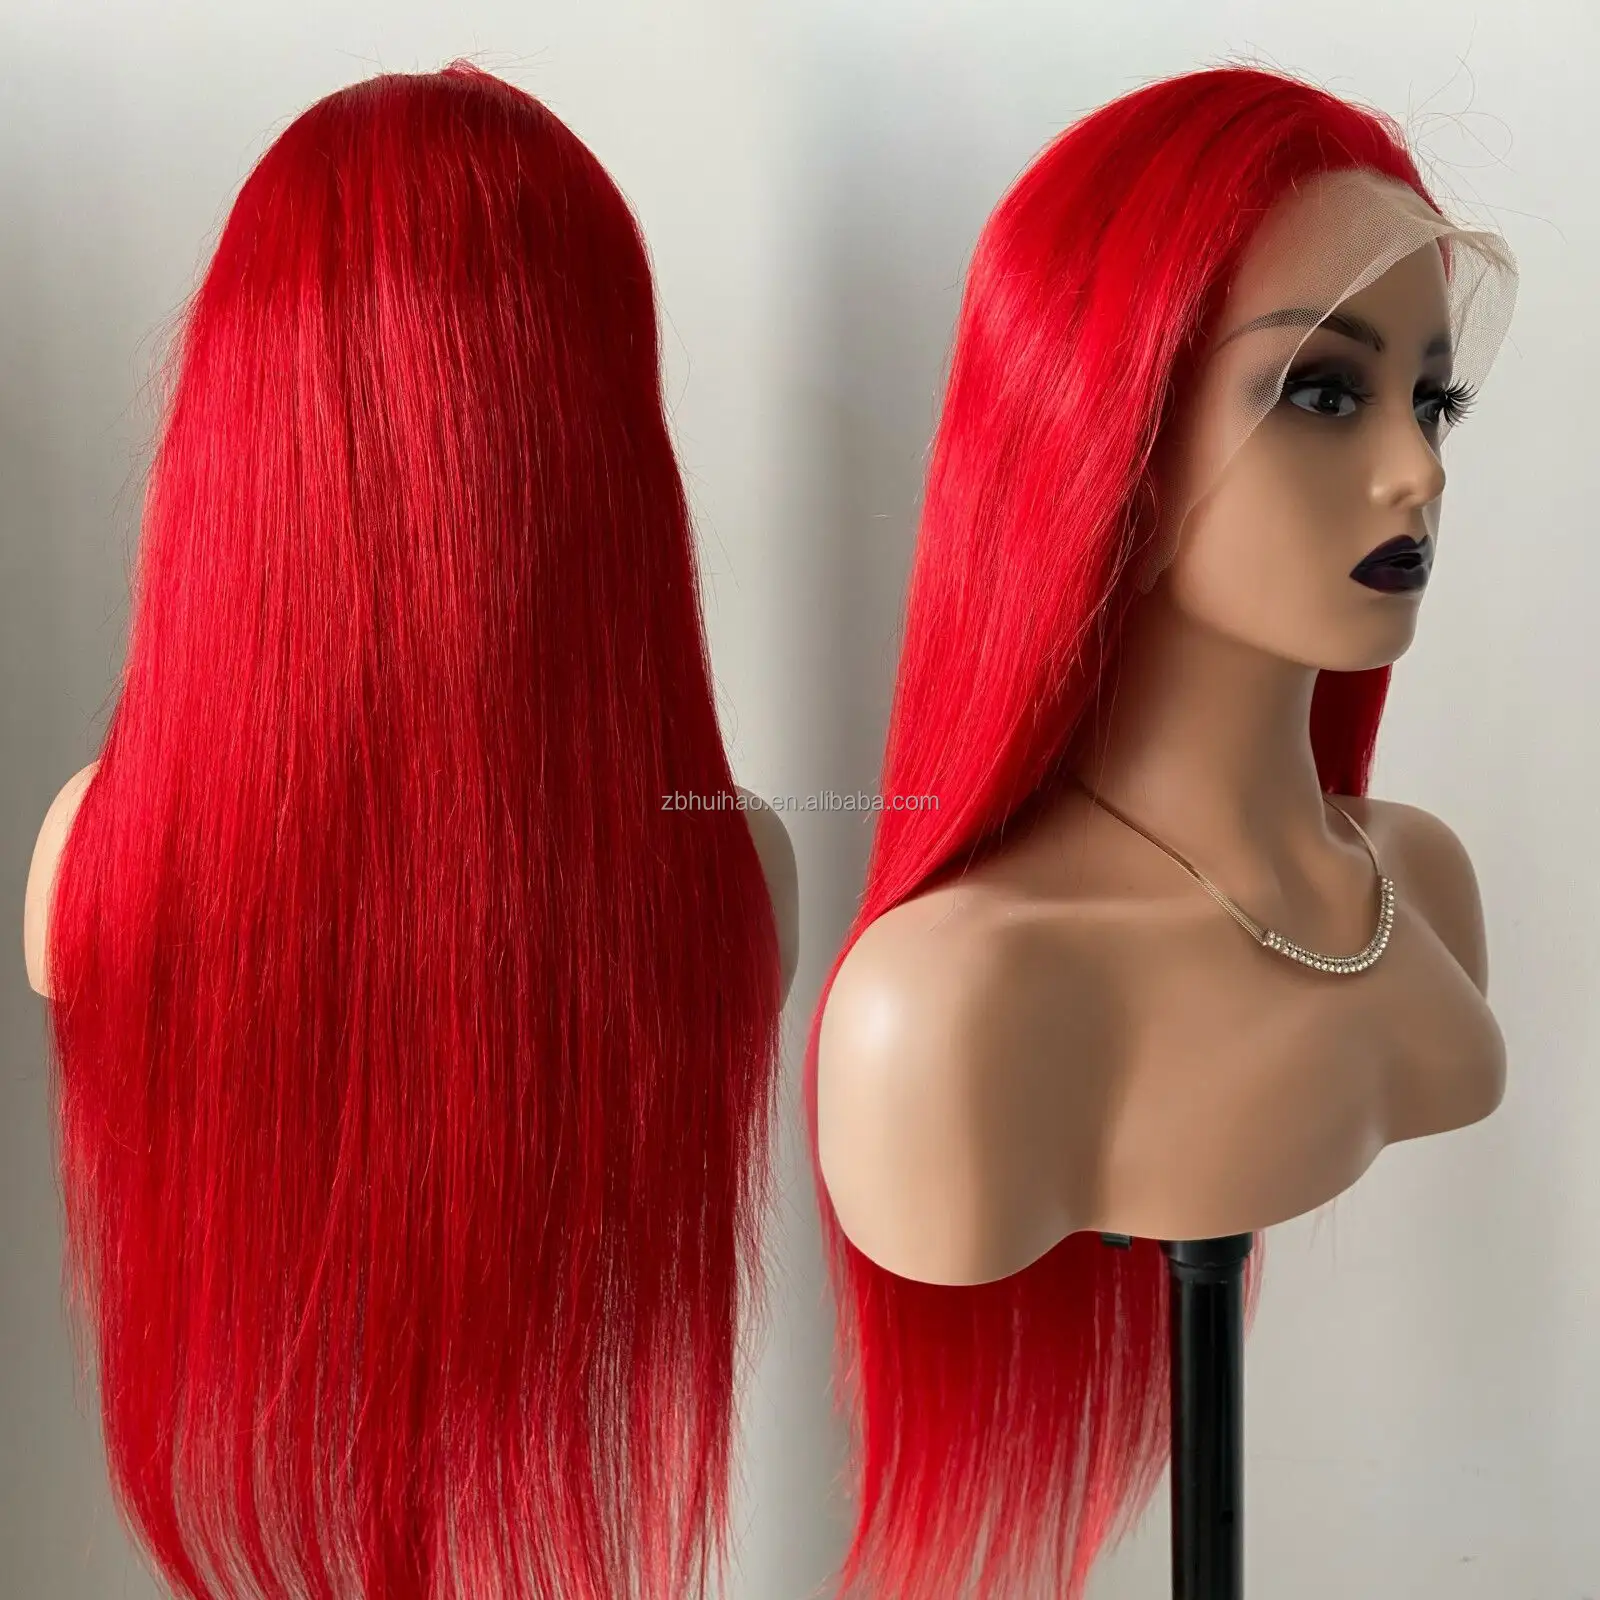 Wholesale frontal wig virgin hair vendor hd lace 13x4 hd red loose deep wave wig 40 inch long lace front wig